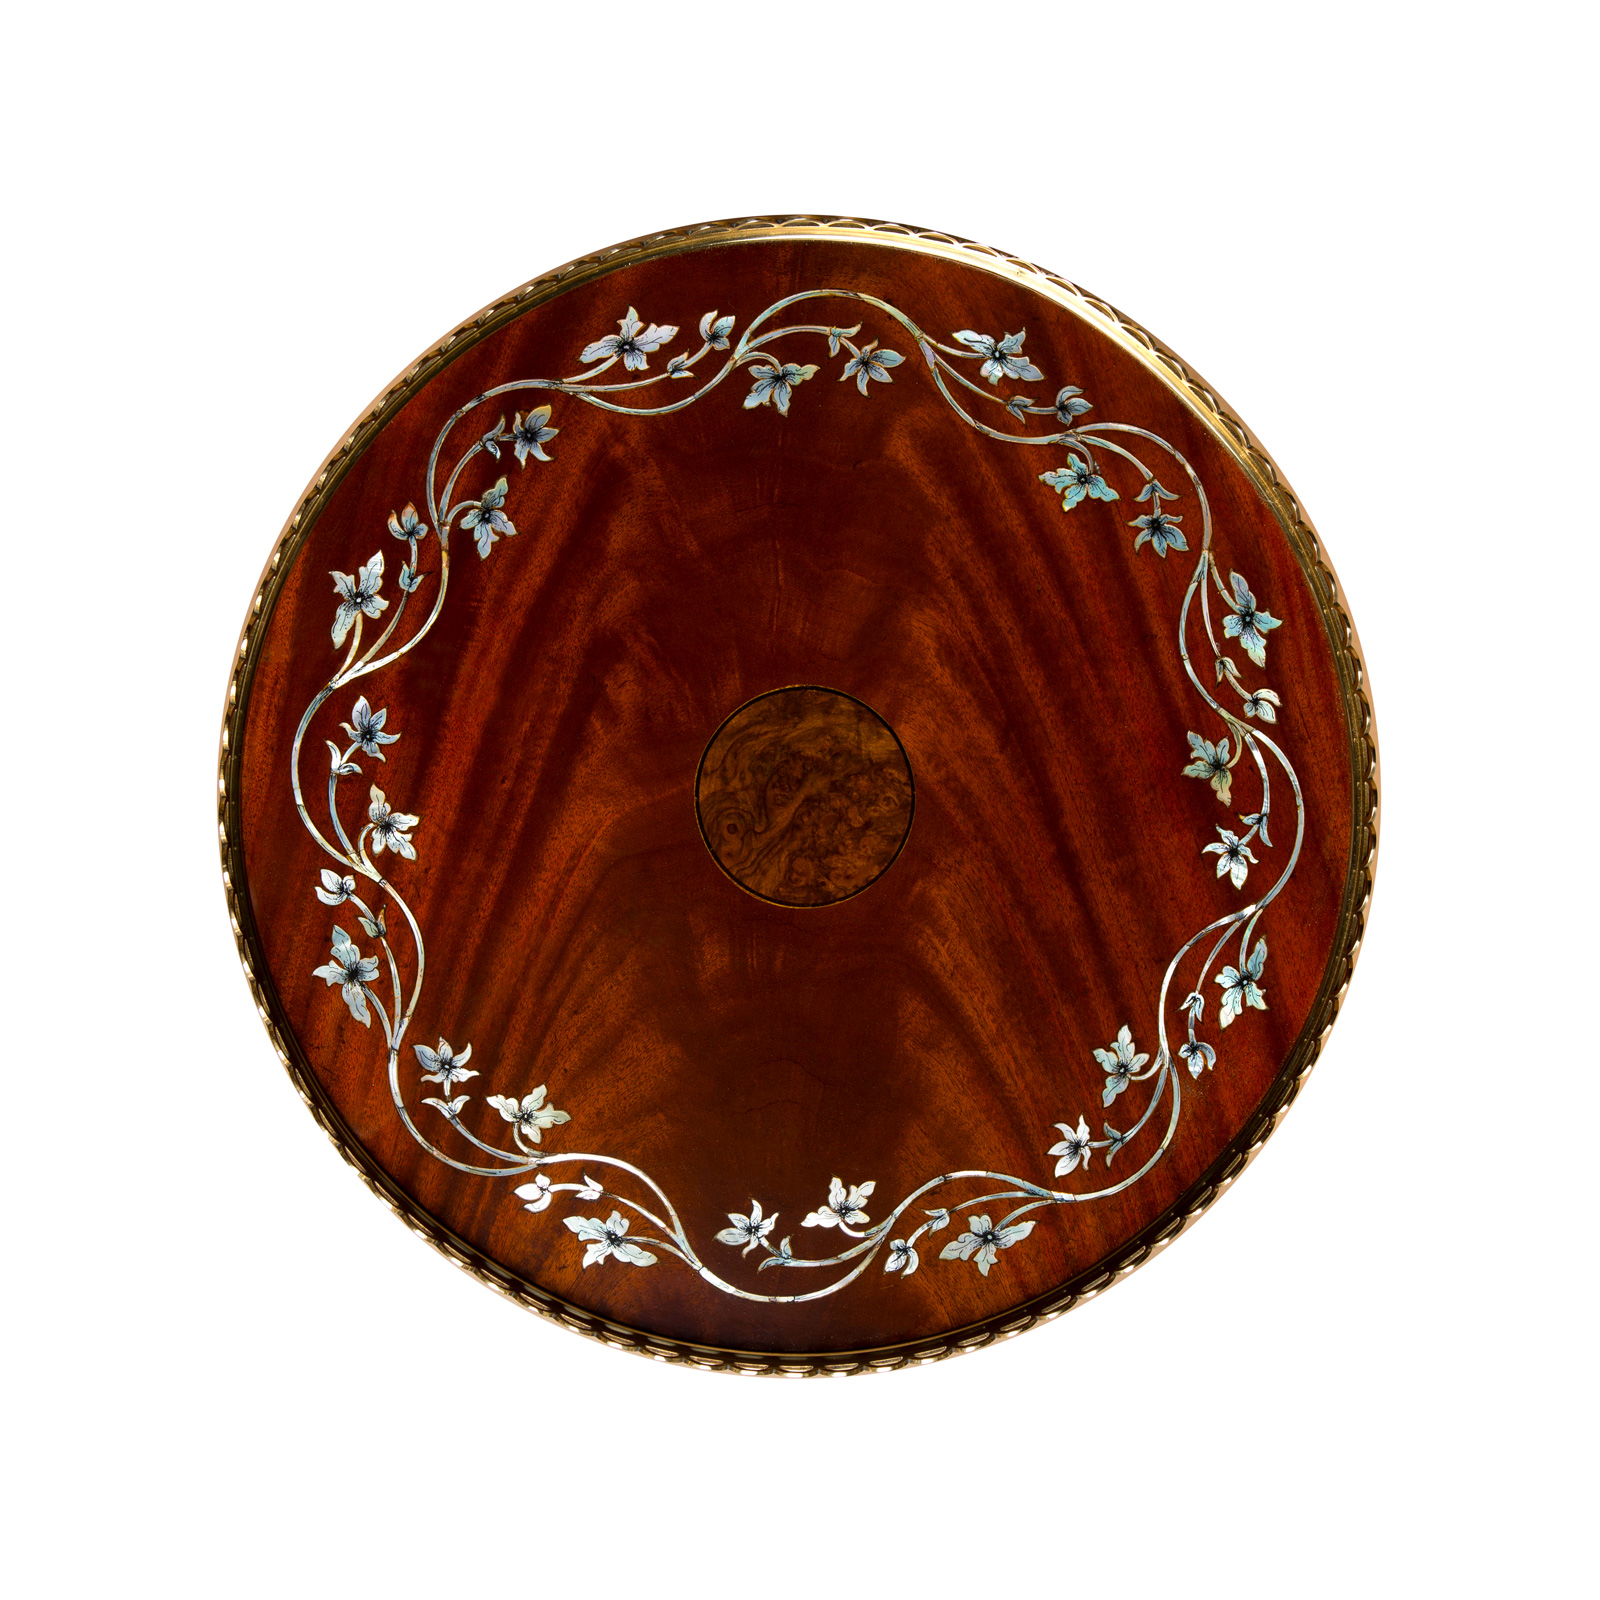 This top view depicts the hand-crafted use of the finest crotch mahogany and burls available, sourced worldwide for their distinct beauty and characteristics.